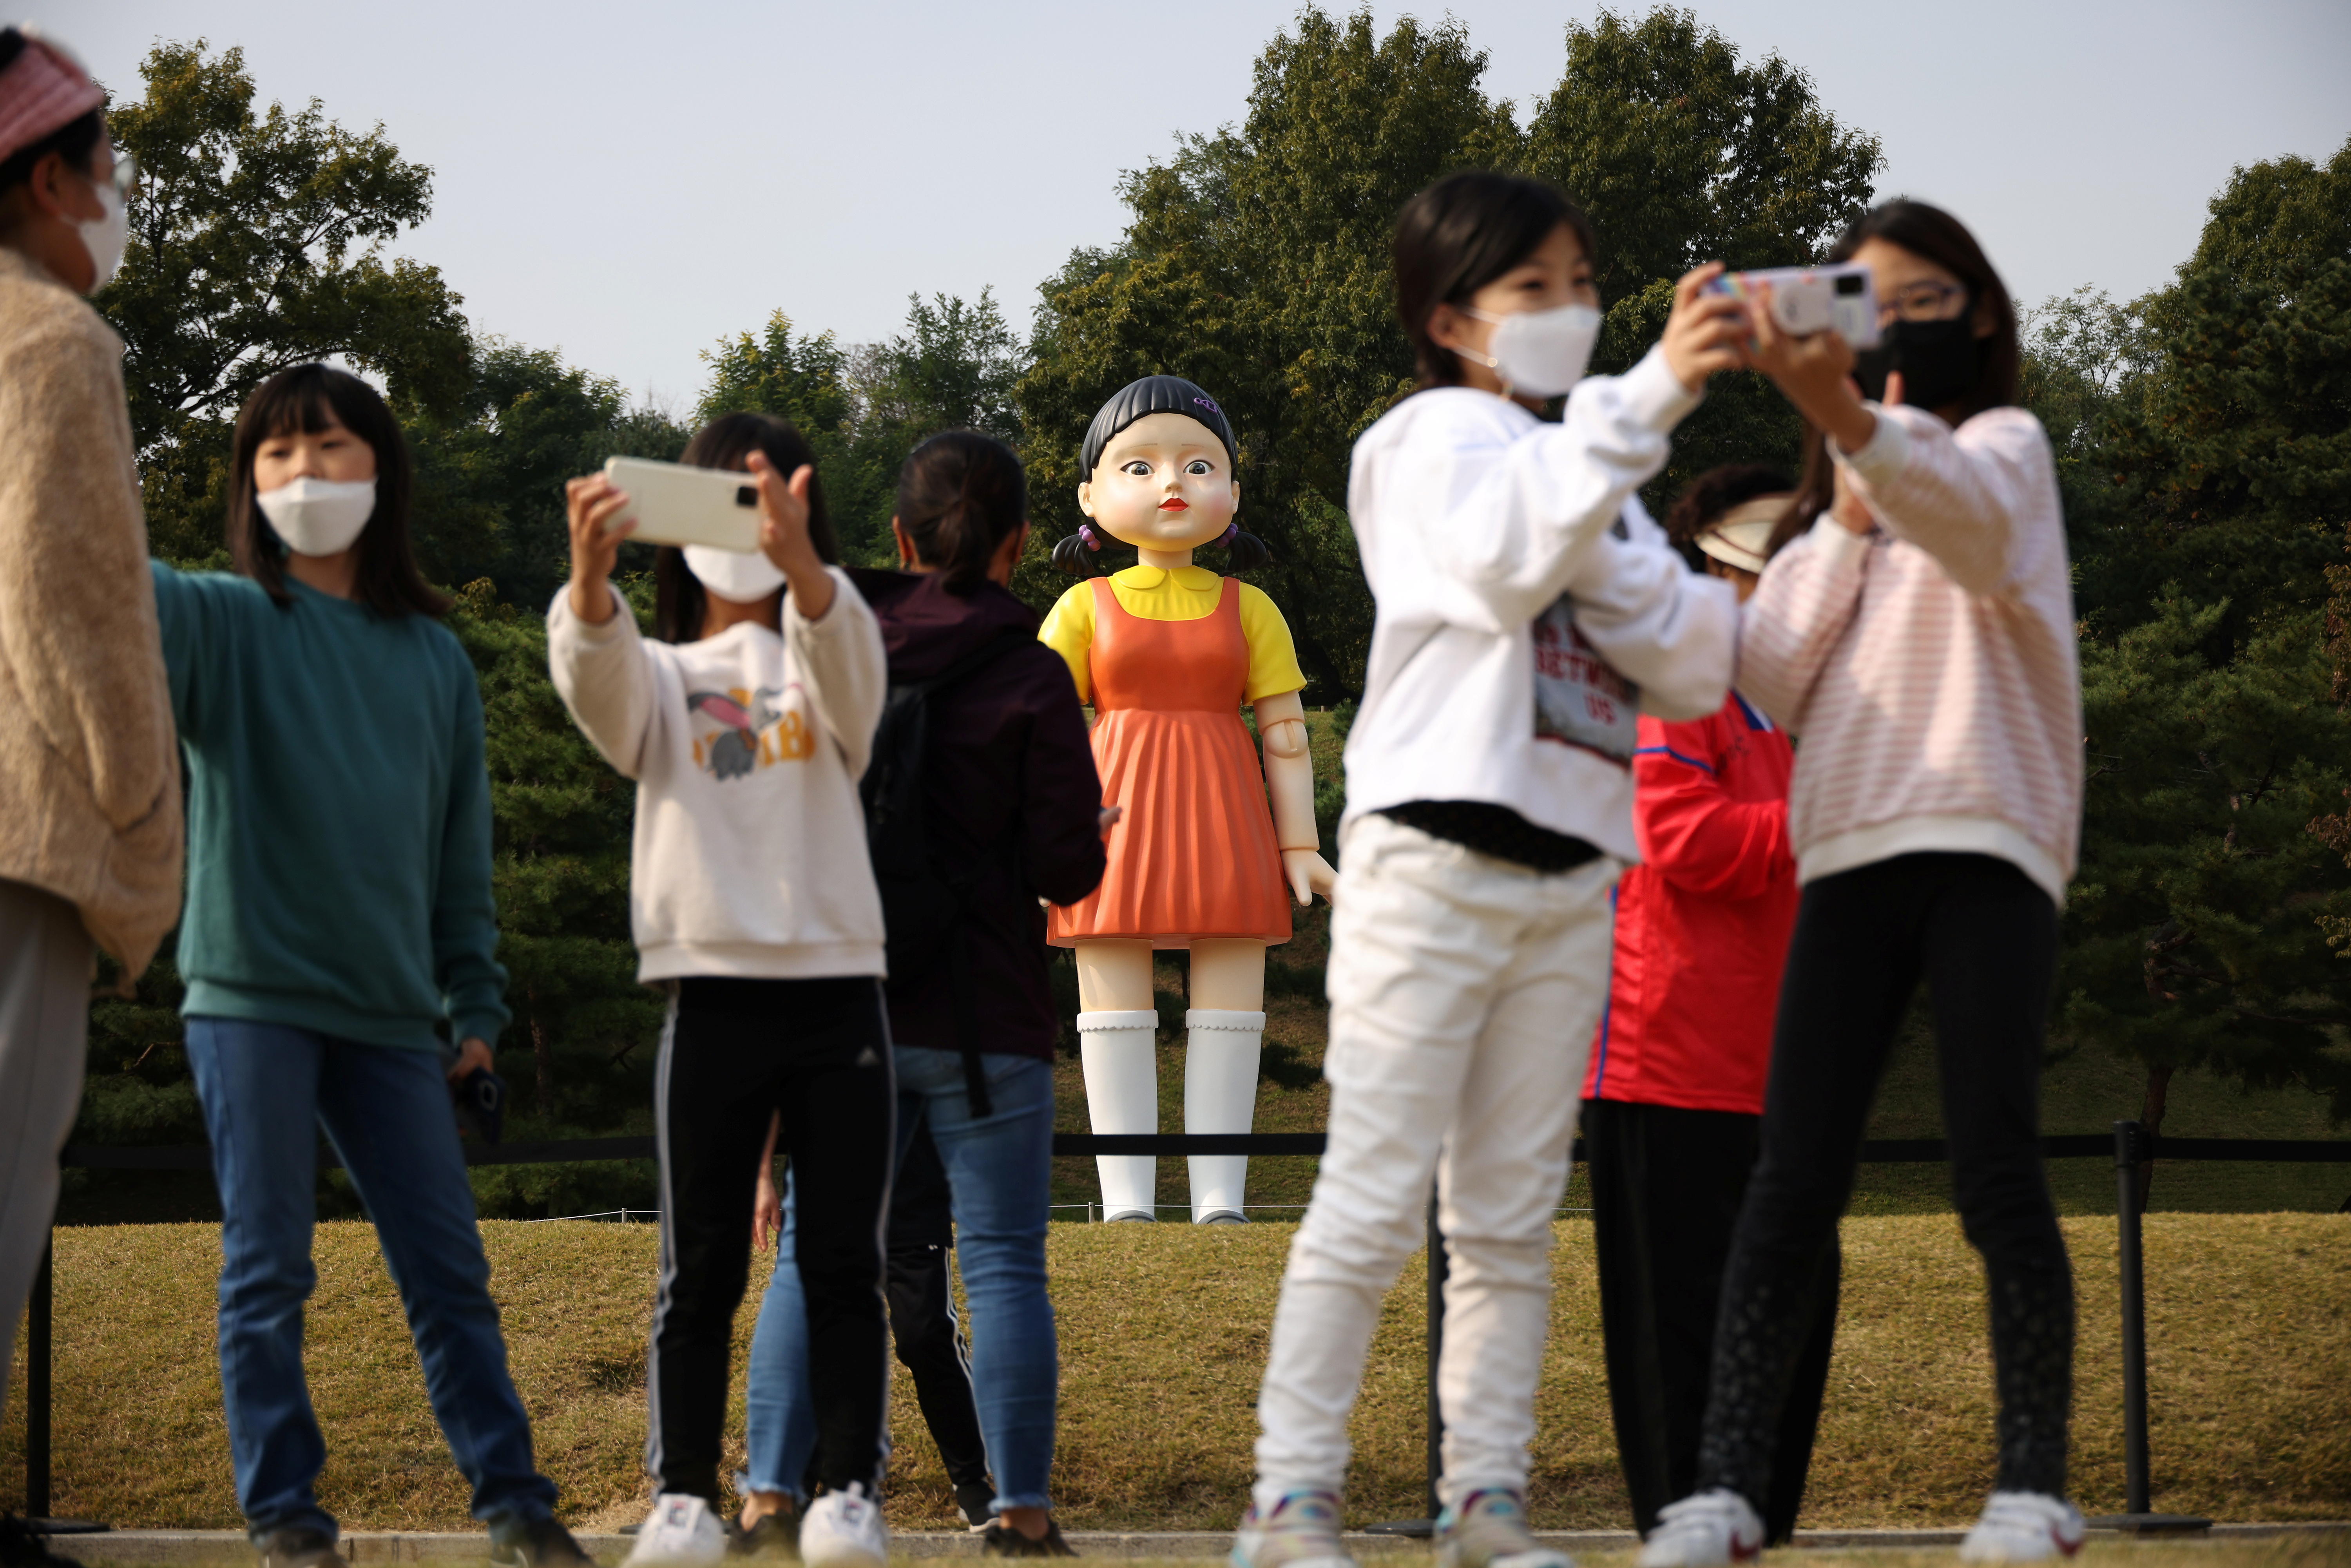 People take a selfie with a giant doll named 'Younghee' from Netflix series 'Squid Game' on display at a park in Seoul